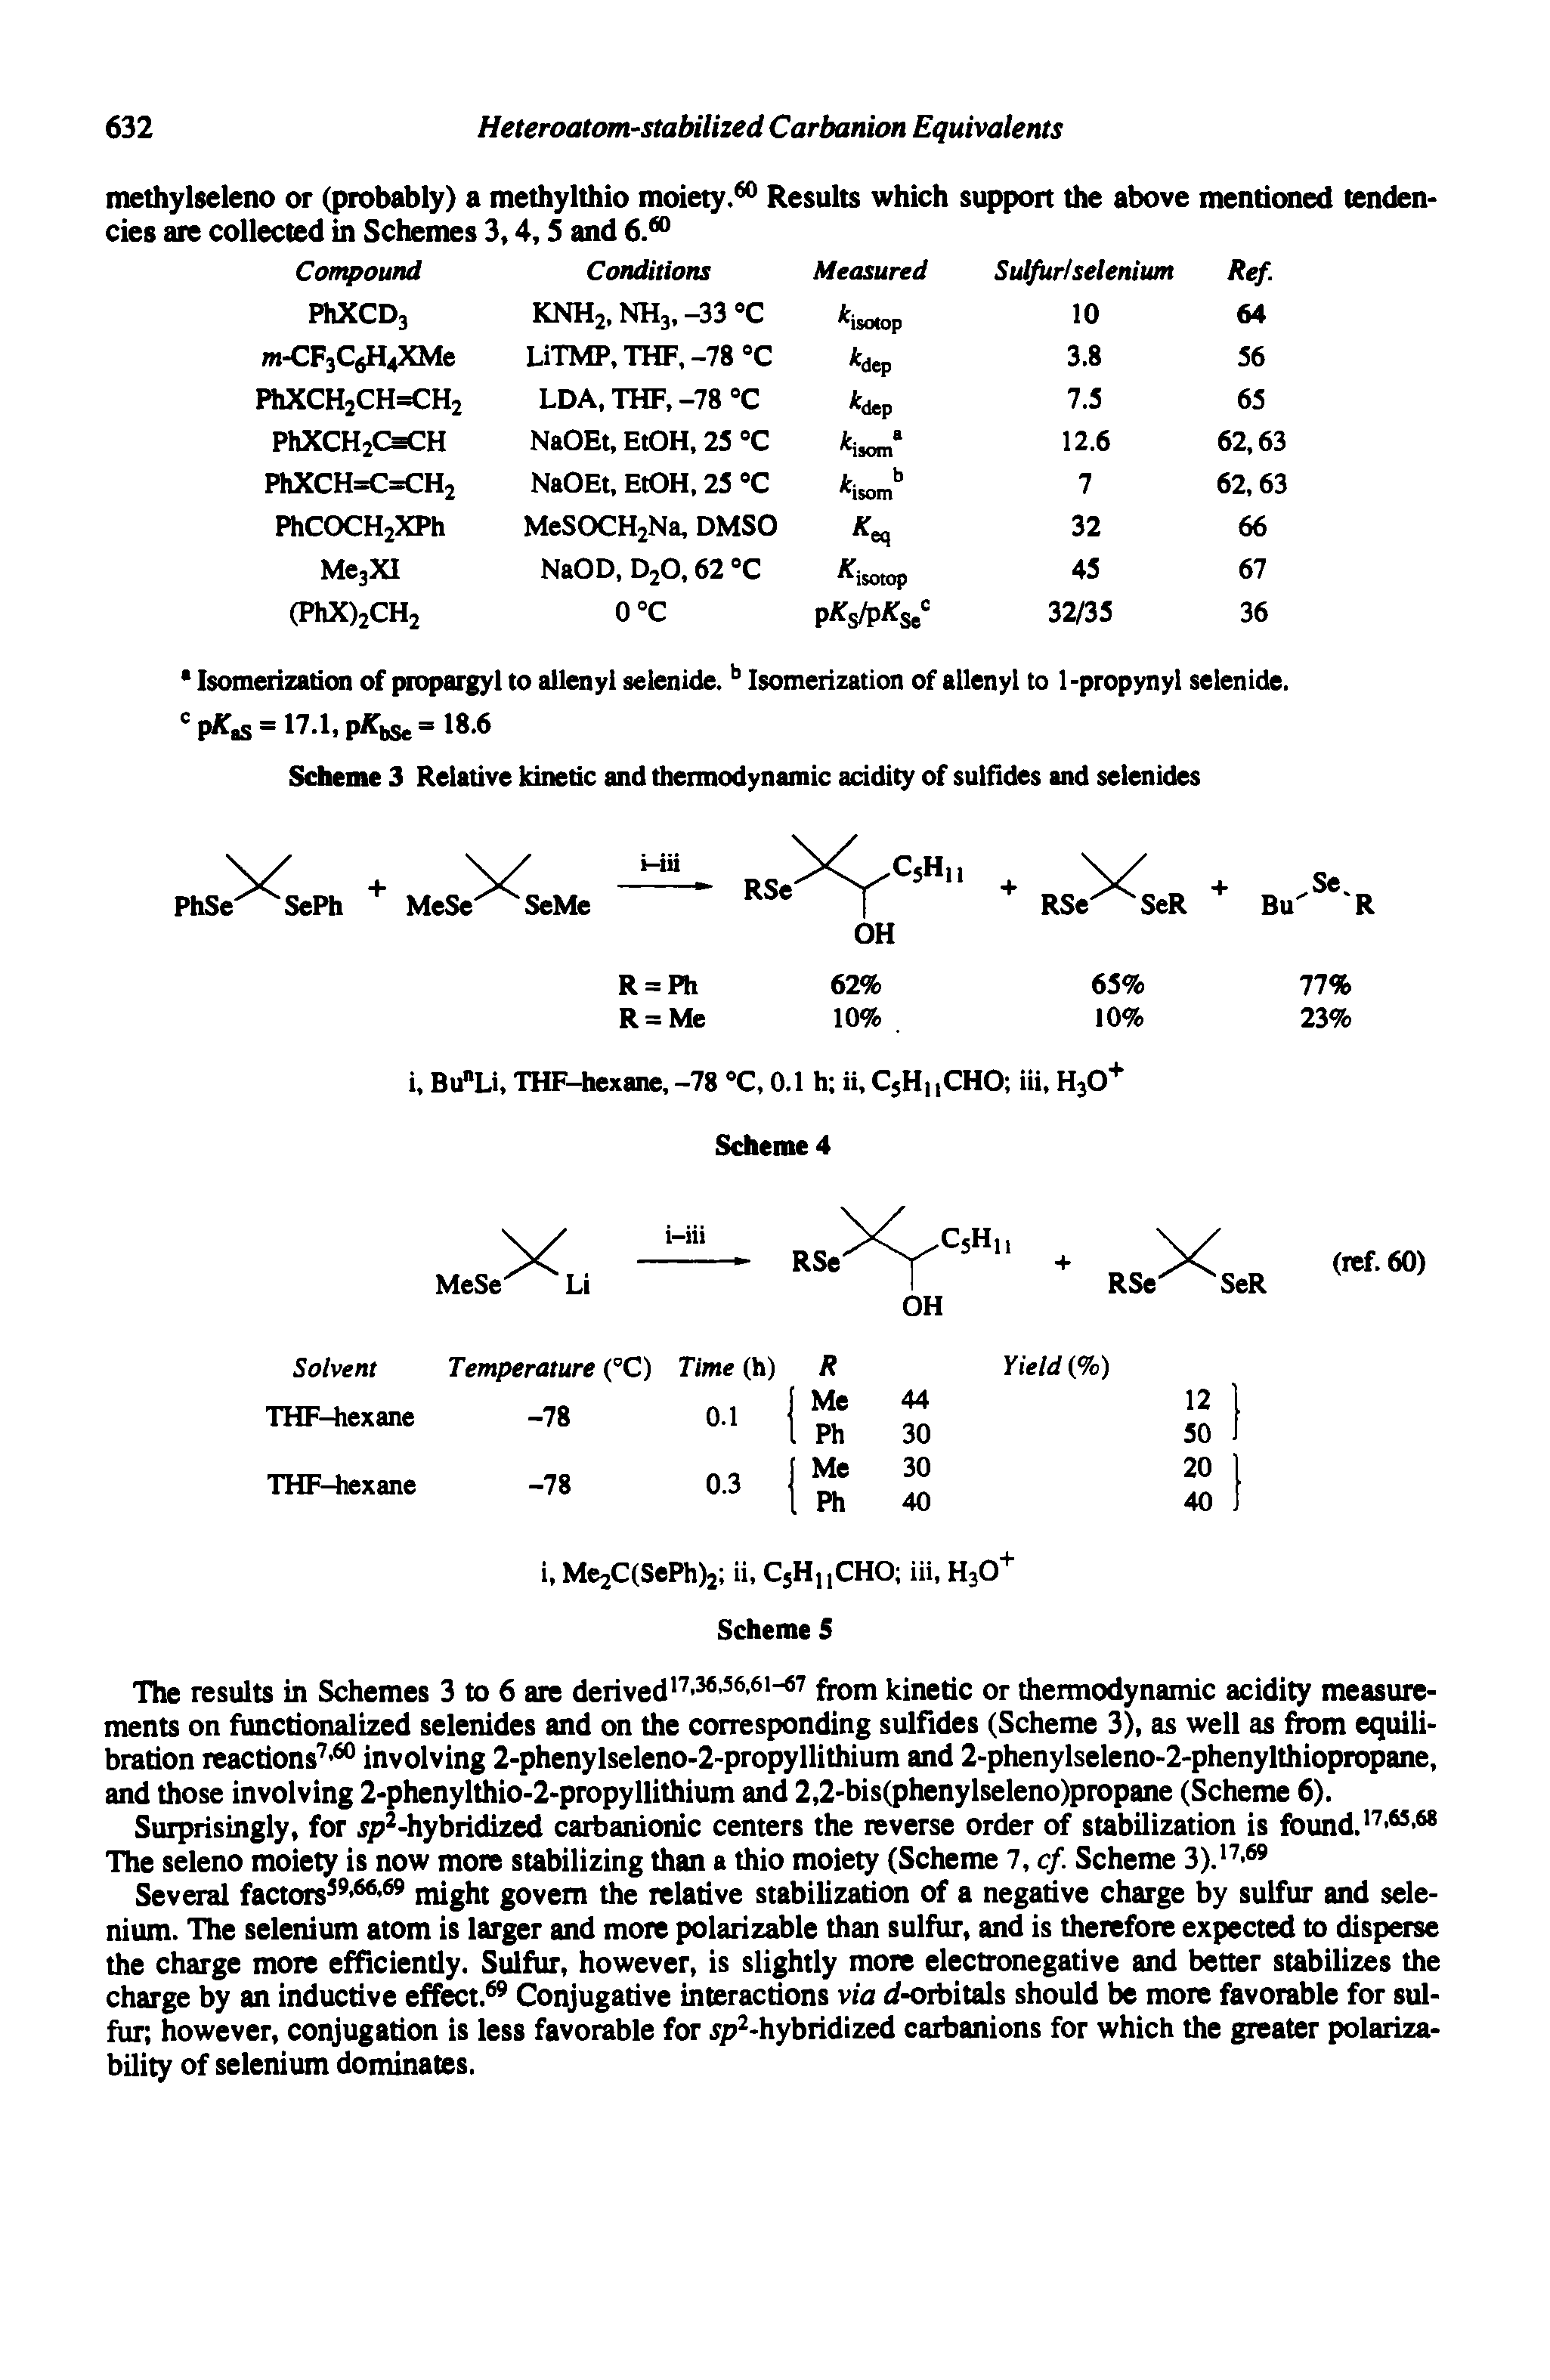 Scheme 3 Relative kinetic and thermodynamic acidity of sulfides and selenides...